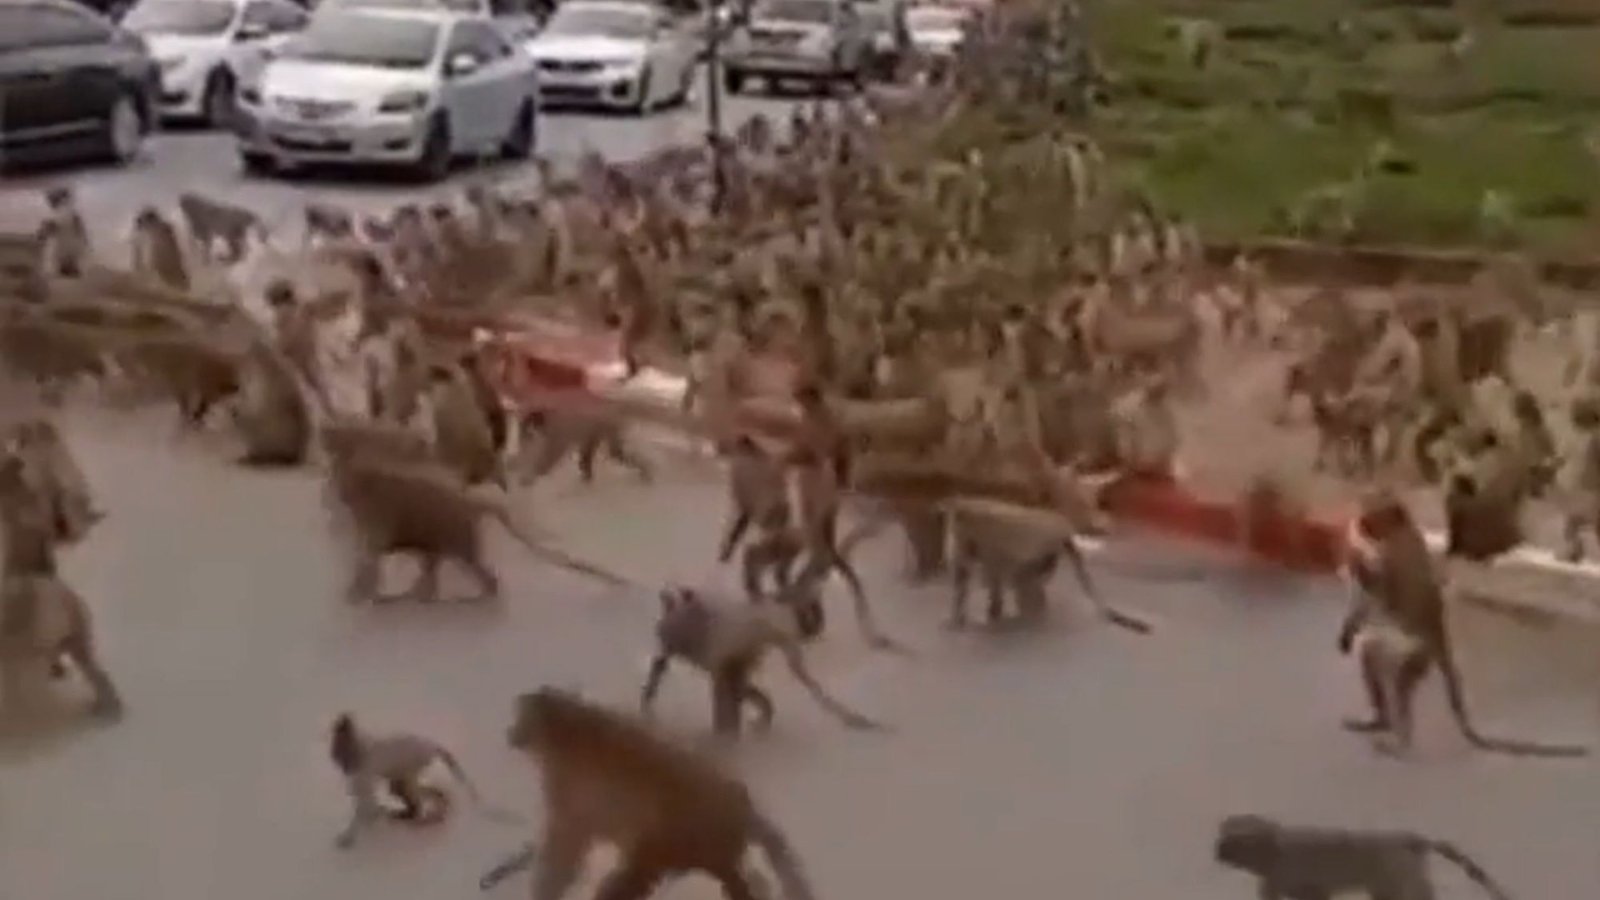 Shock vids show how terrifying MONKEY army has totally taken over city as they attack humans & steal food